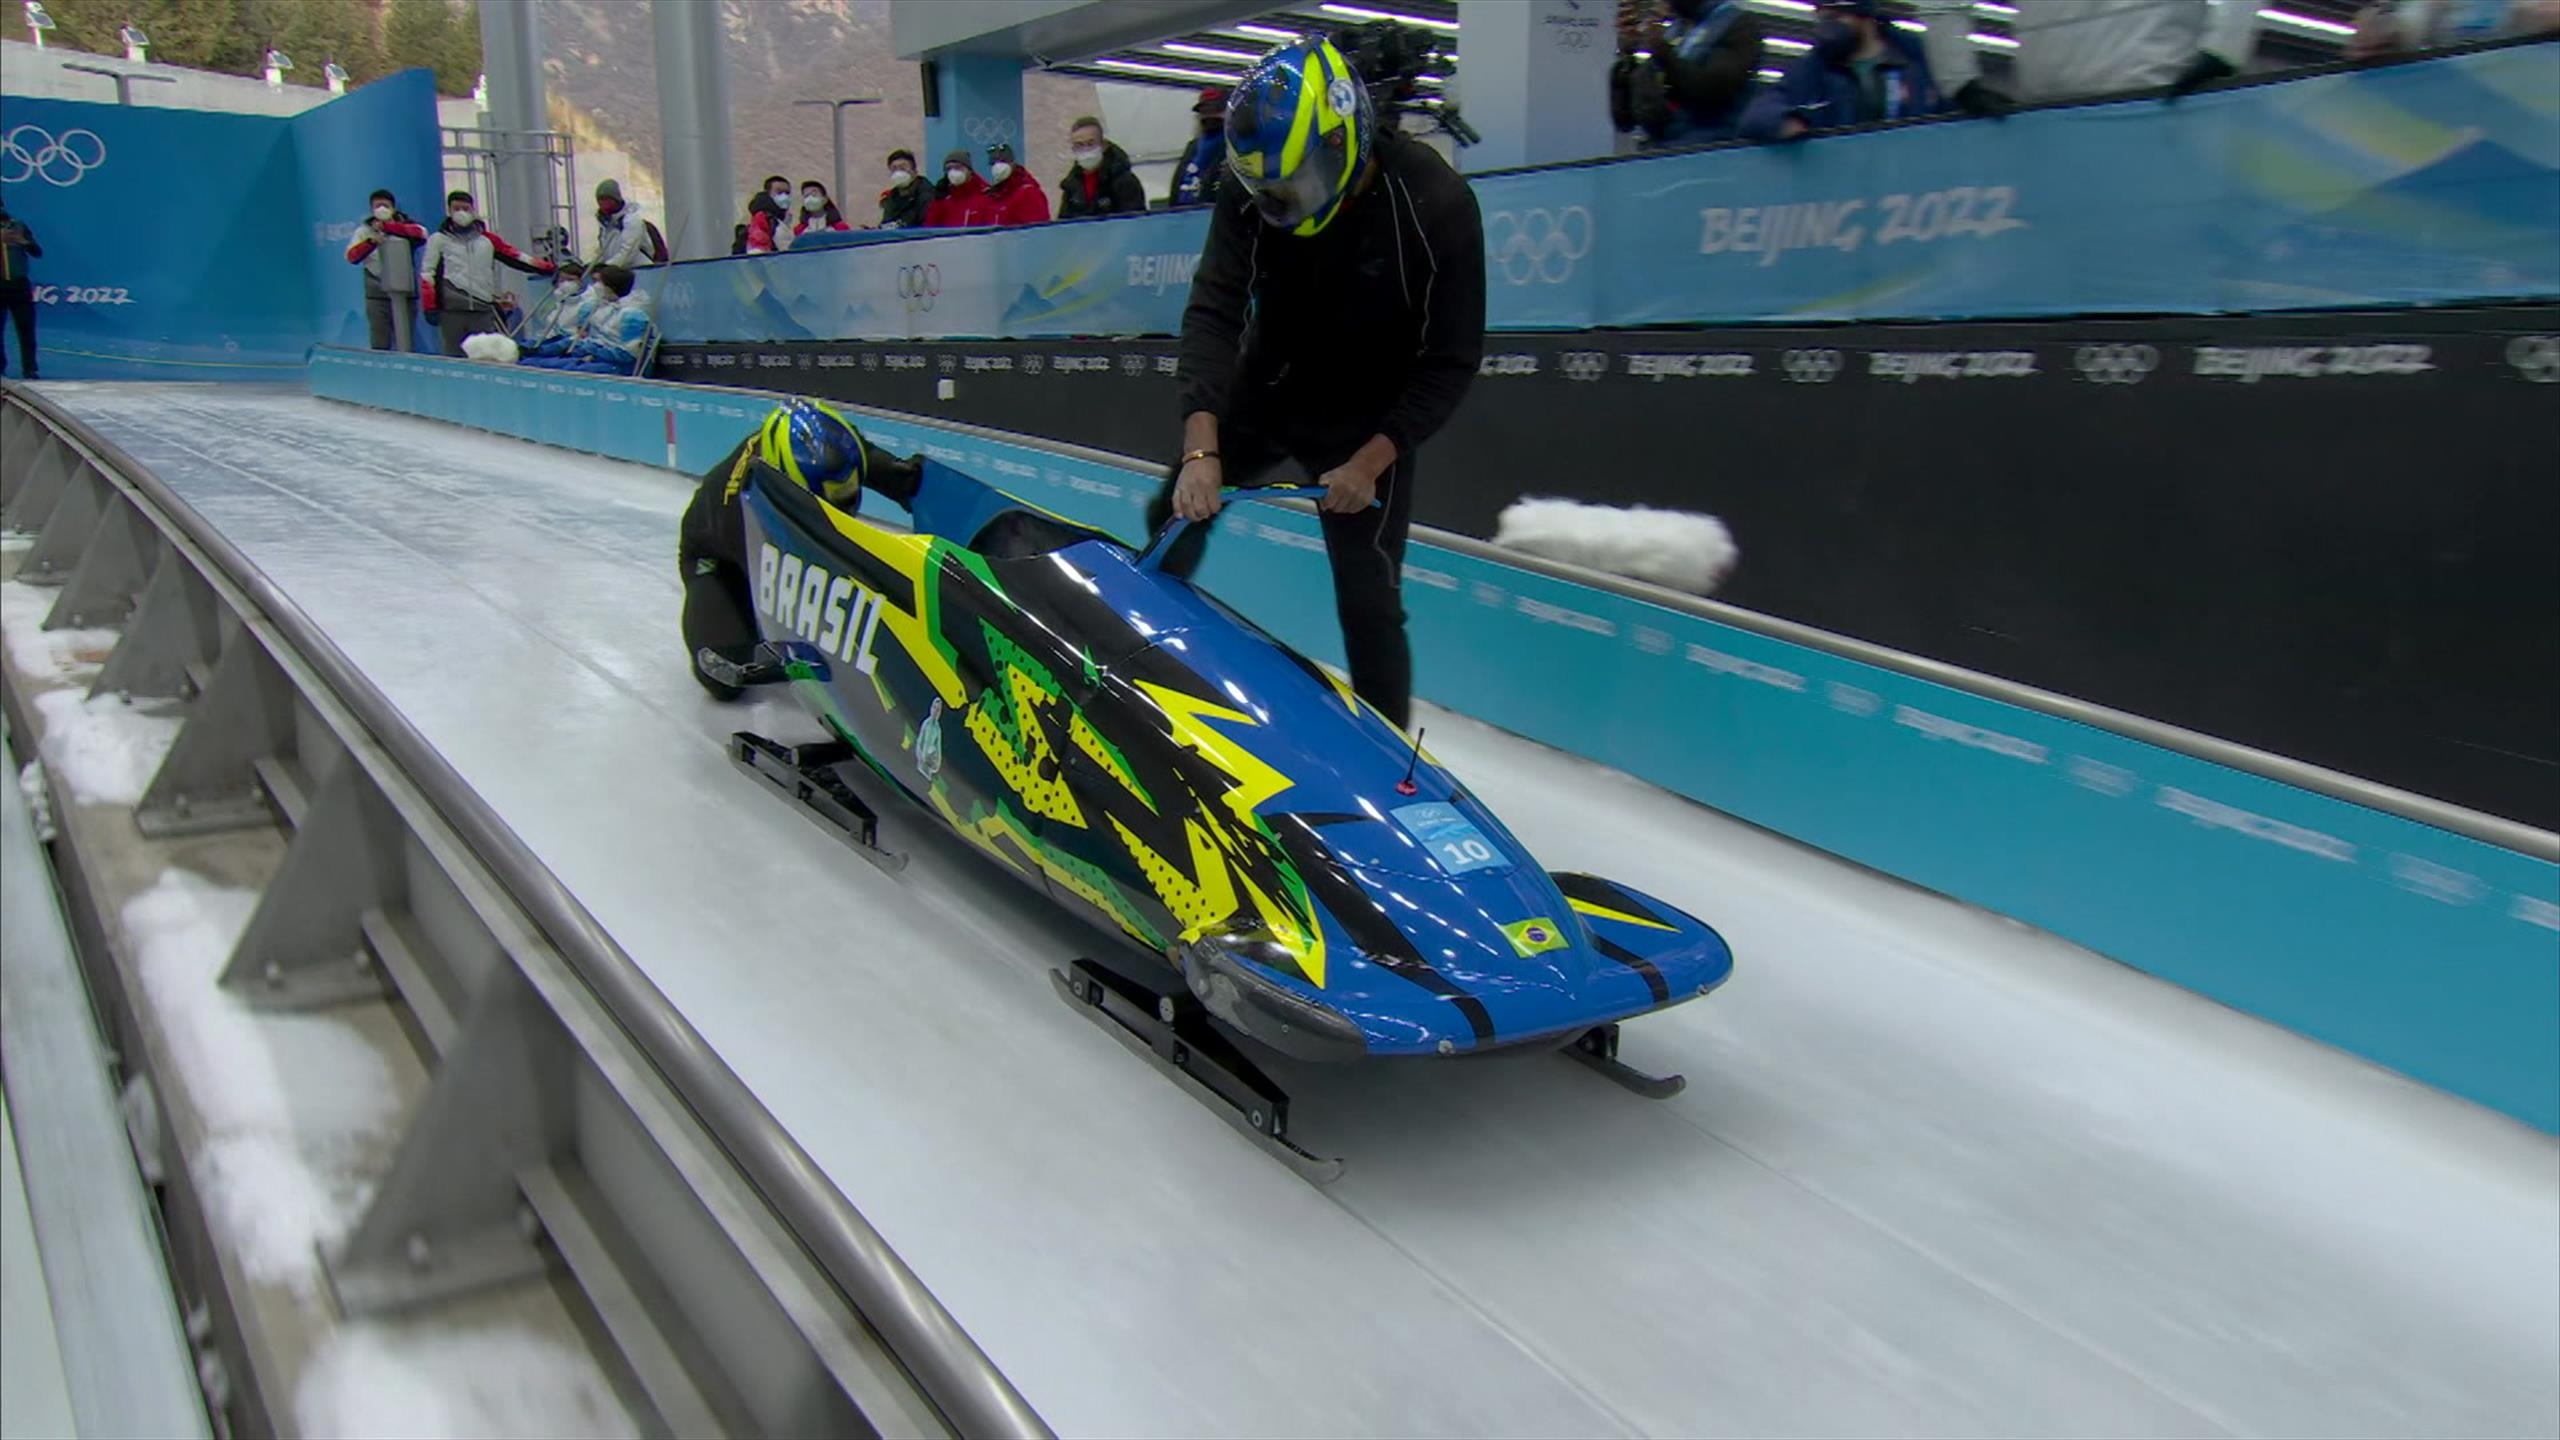 Bobsleigh: The bobsled of Brasil at the 2022 Beijing Winter Olympics. 2560x1440 HD Wallpaper.